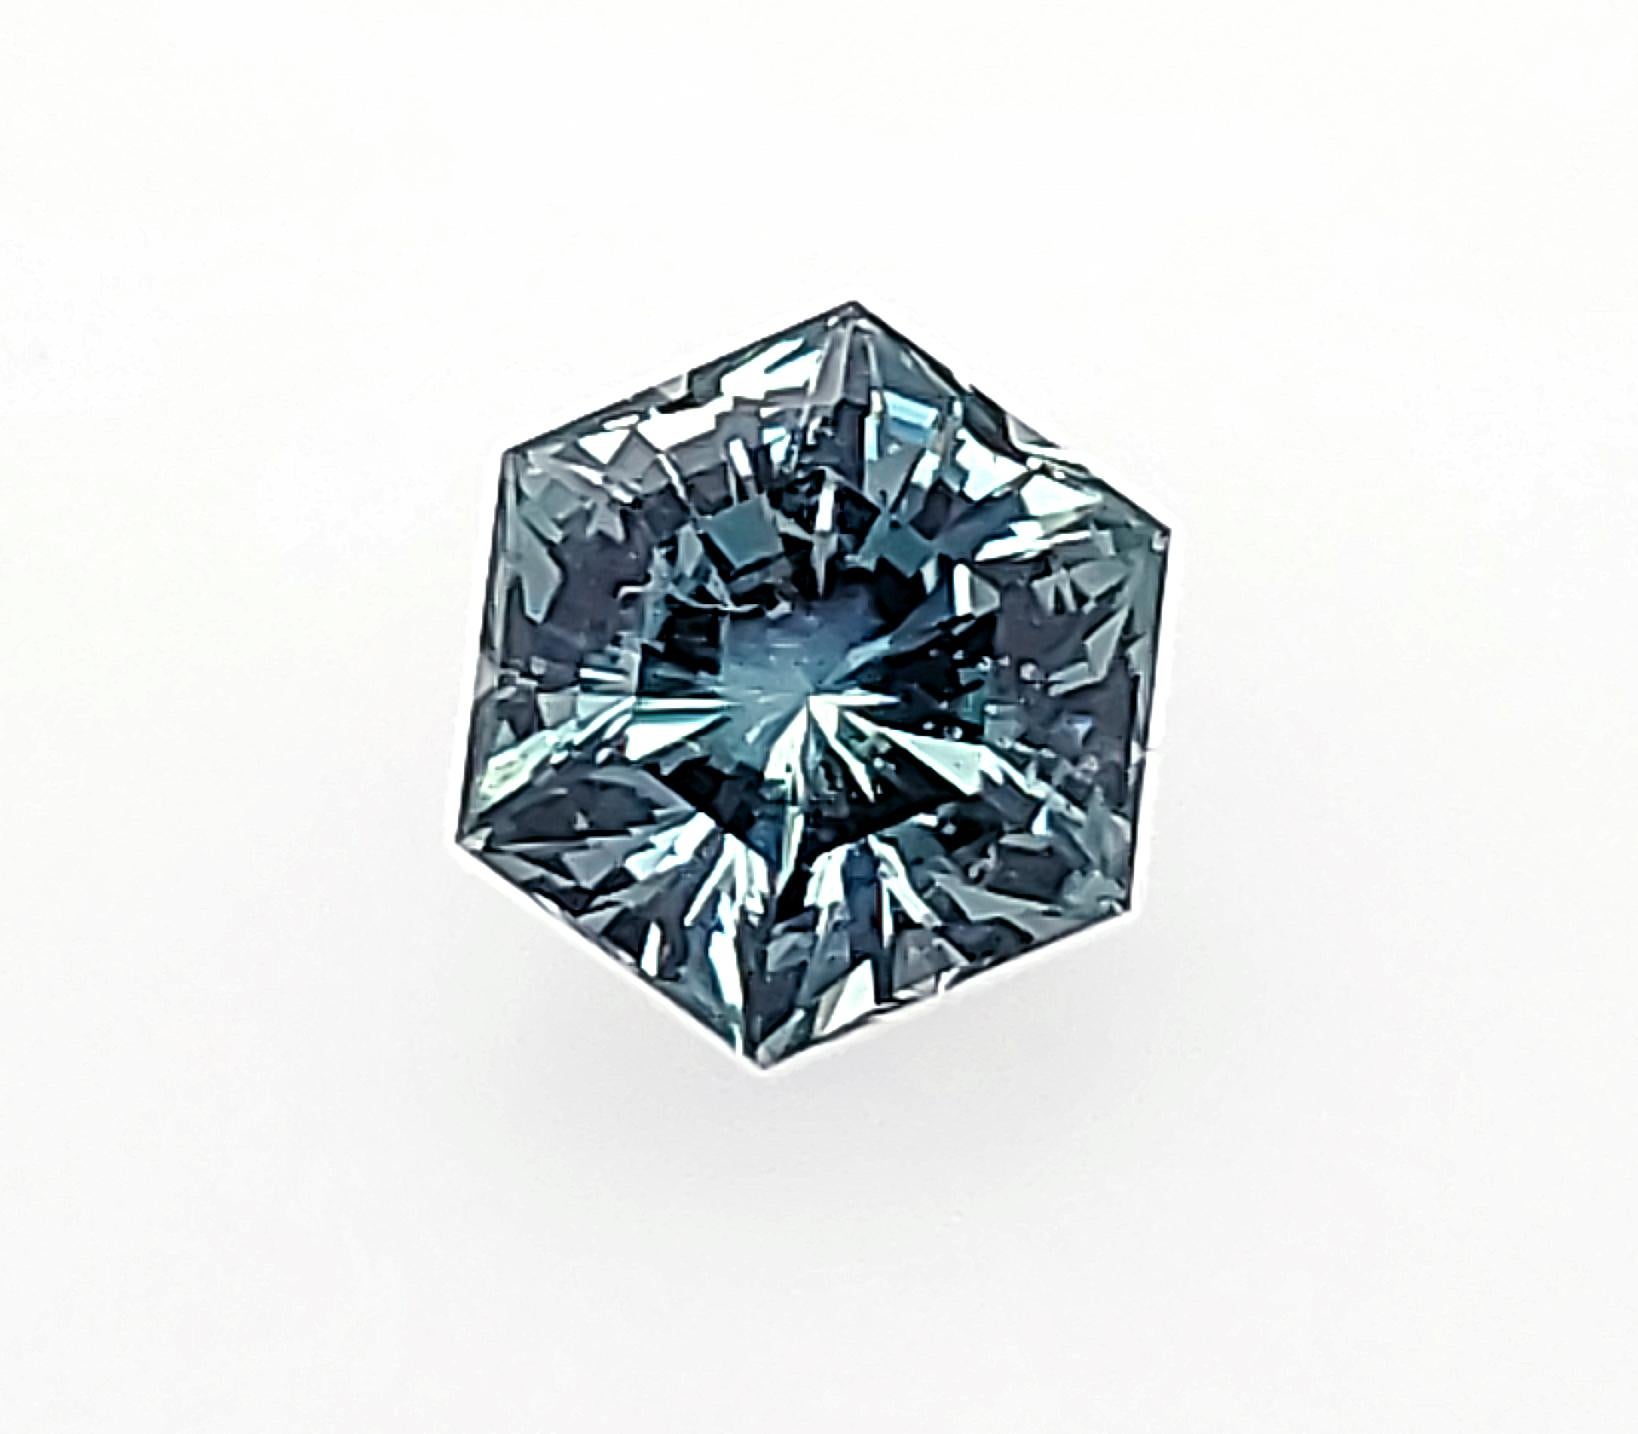 Beautiful 2.39ct Blue Montana Sapphire in a Hexagon-like Shape, which is frequently the shape of the natural crystals found in this locality  Masterfully Faceted by an AGTA Award Winning Cutter, whose work is within museums. He is one of those